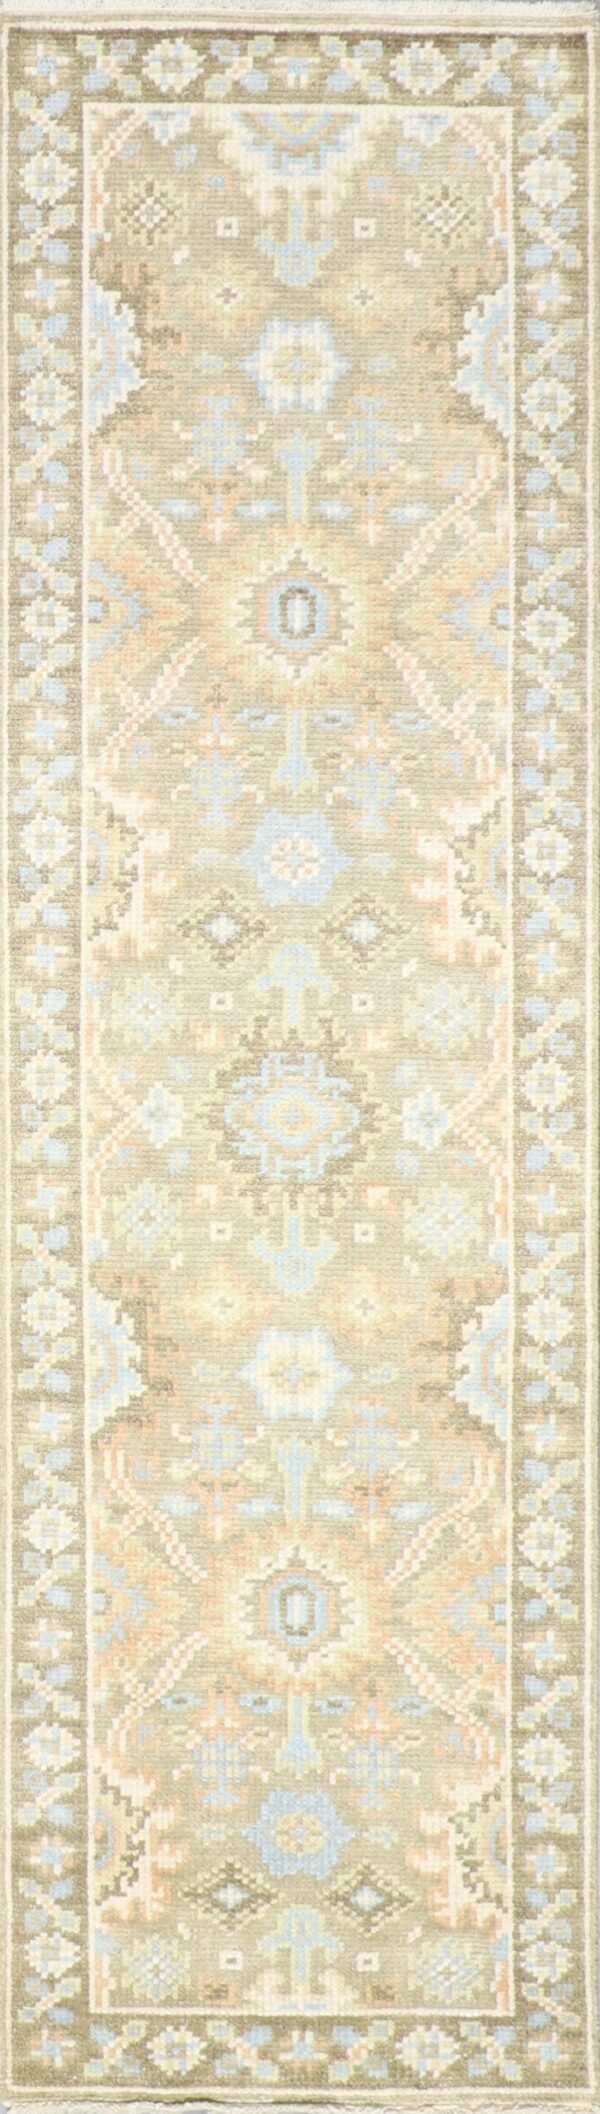 2’7”x10’ Decorative Green Wool Hand-Knotted Rug - Direct Rug Import | Rugs in Chicago, Indiana,South Bend,Granger